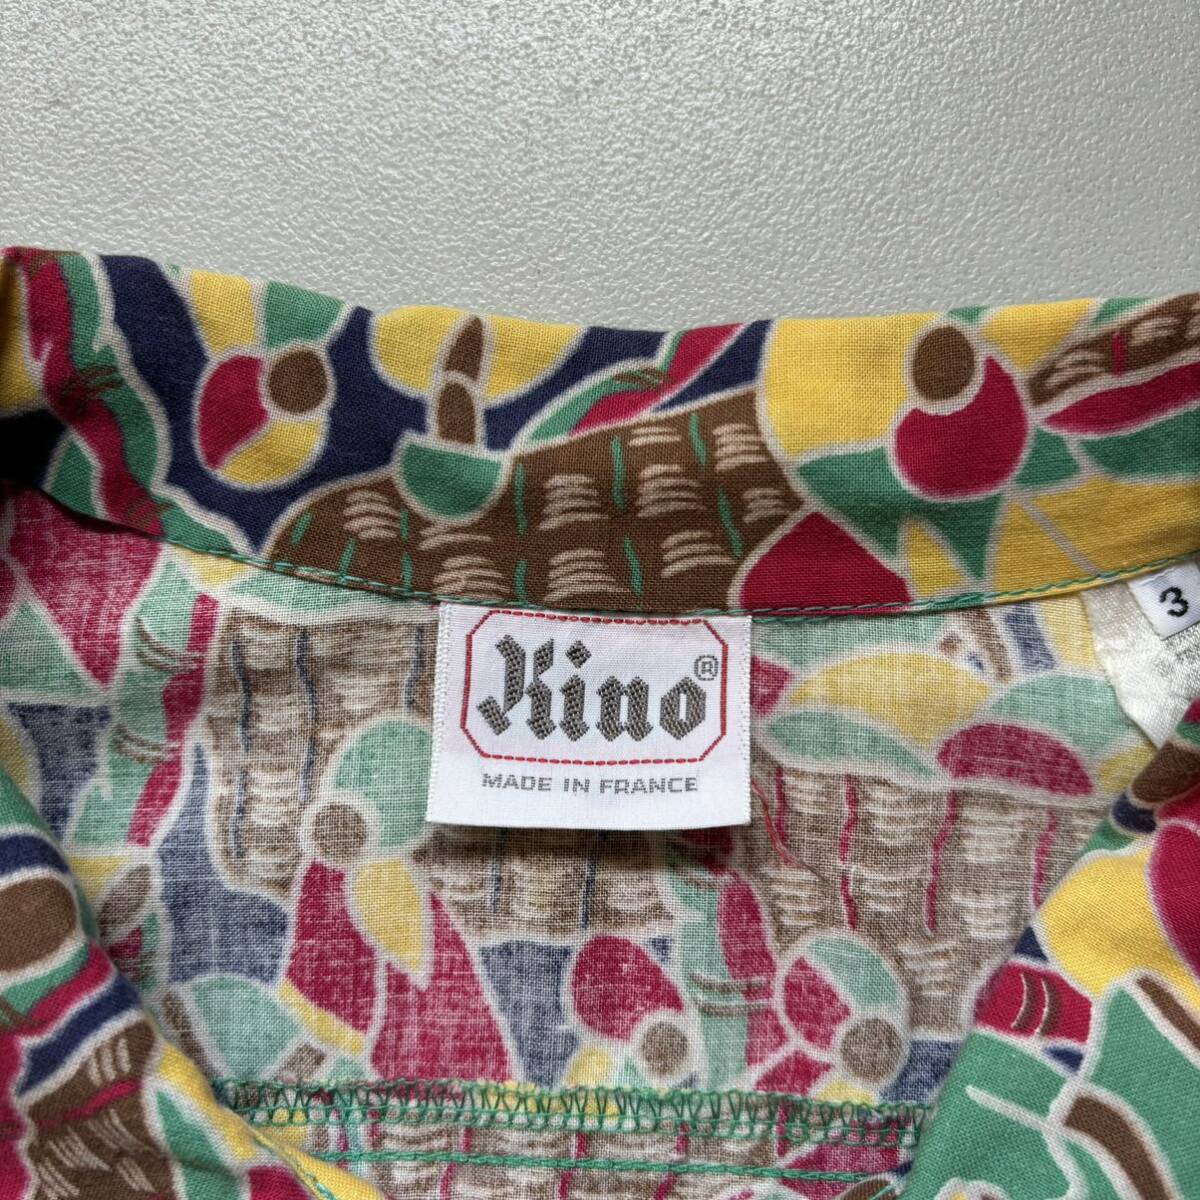 KINO All-over pattern S/S shirt “size L” “made in France” 総柄シャツ 半袖シャツ フランス製_画像6